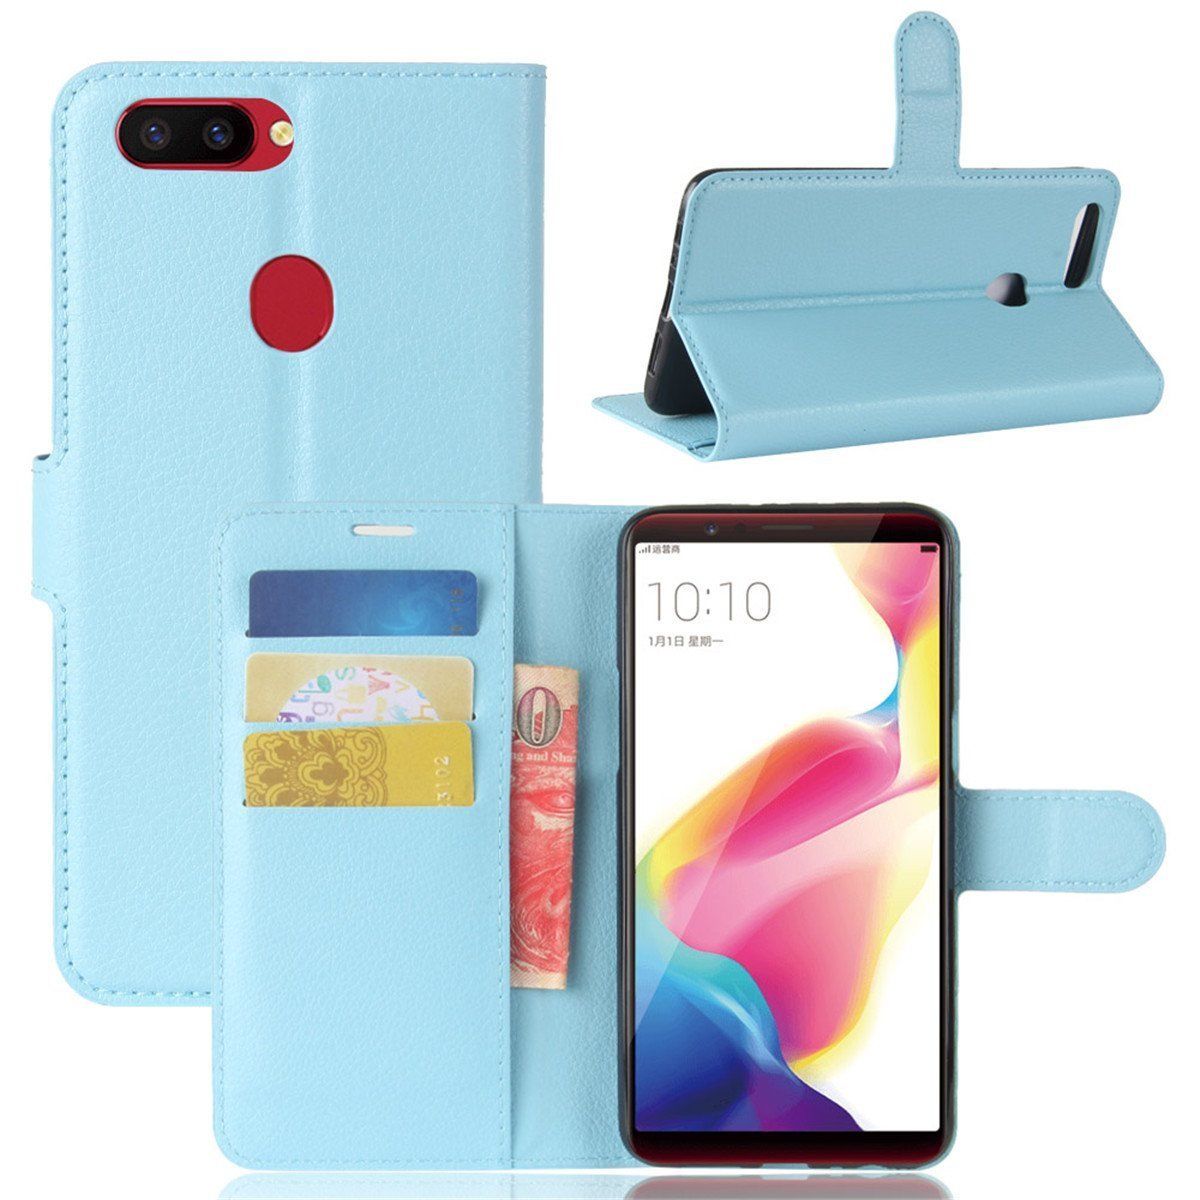 Oppo R15 Pro Premium Leather Wallet Case Cover For Oppo Case-Sky Blue